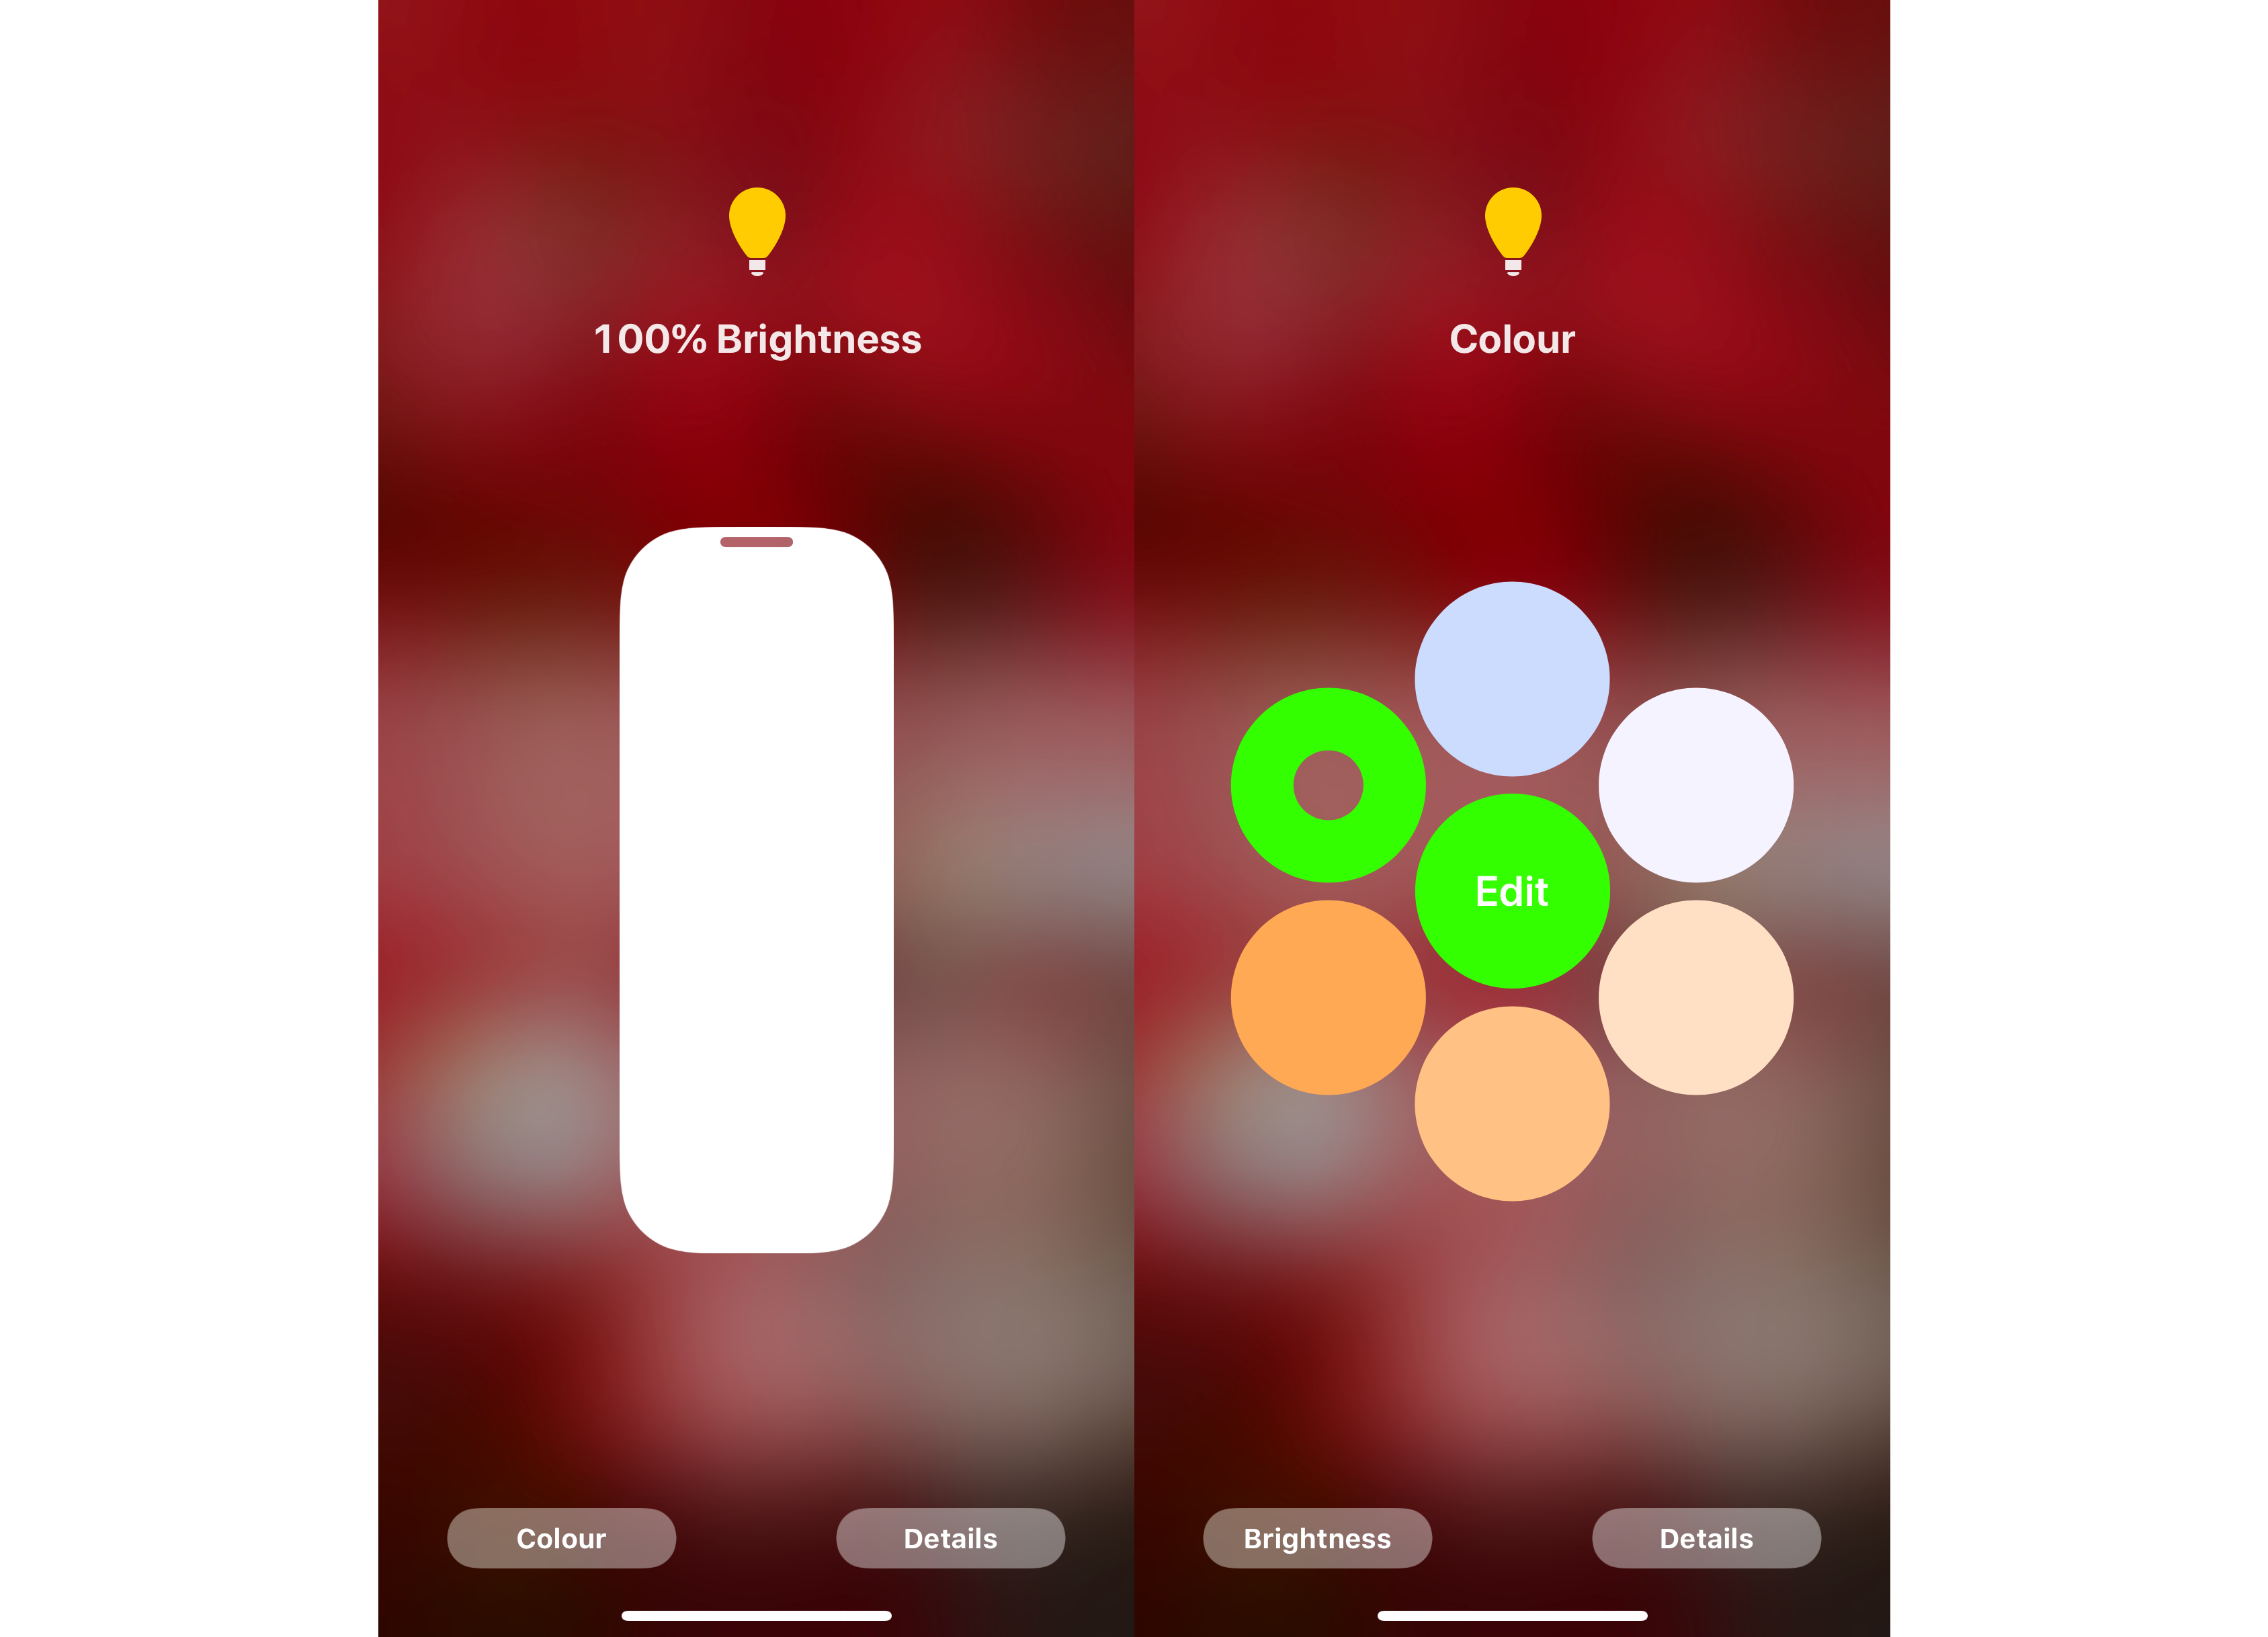 Smart lighting app interface showing brightness and color settings.